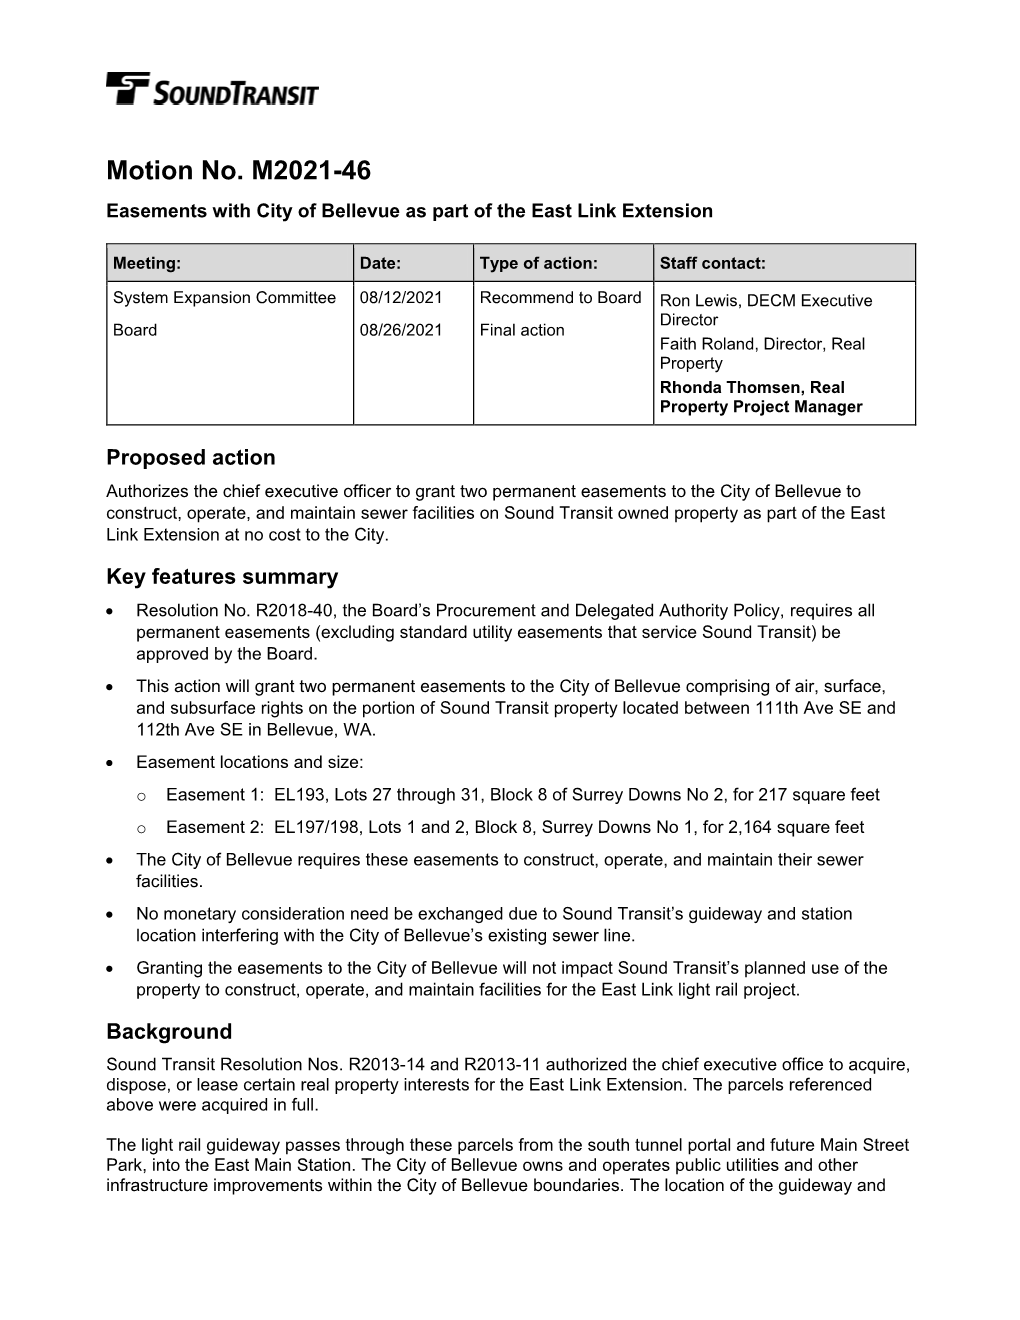 Motion No. M2021-46 Easements with City of Bellevue As Part of the East Link Extension